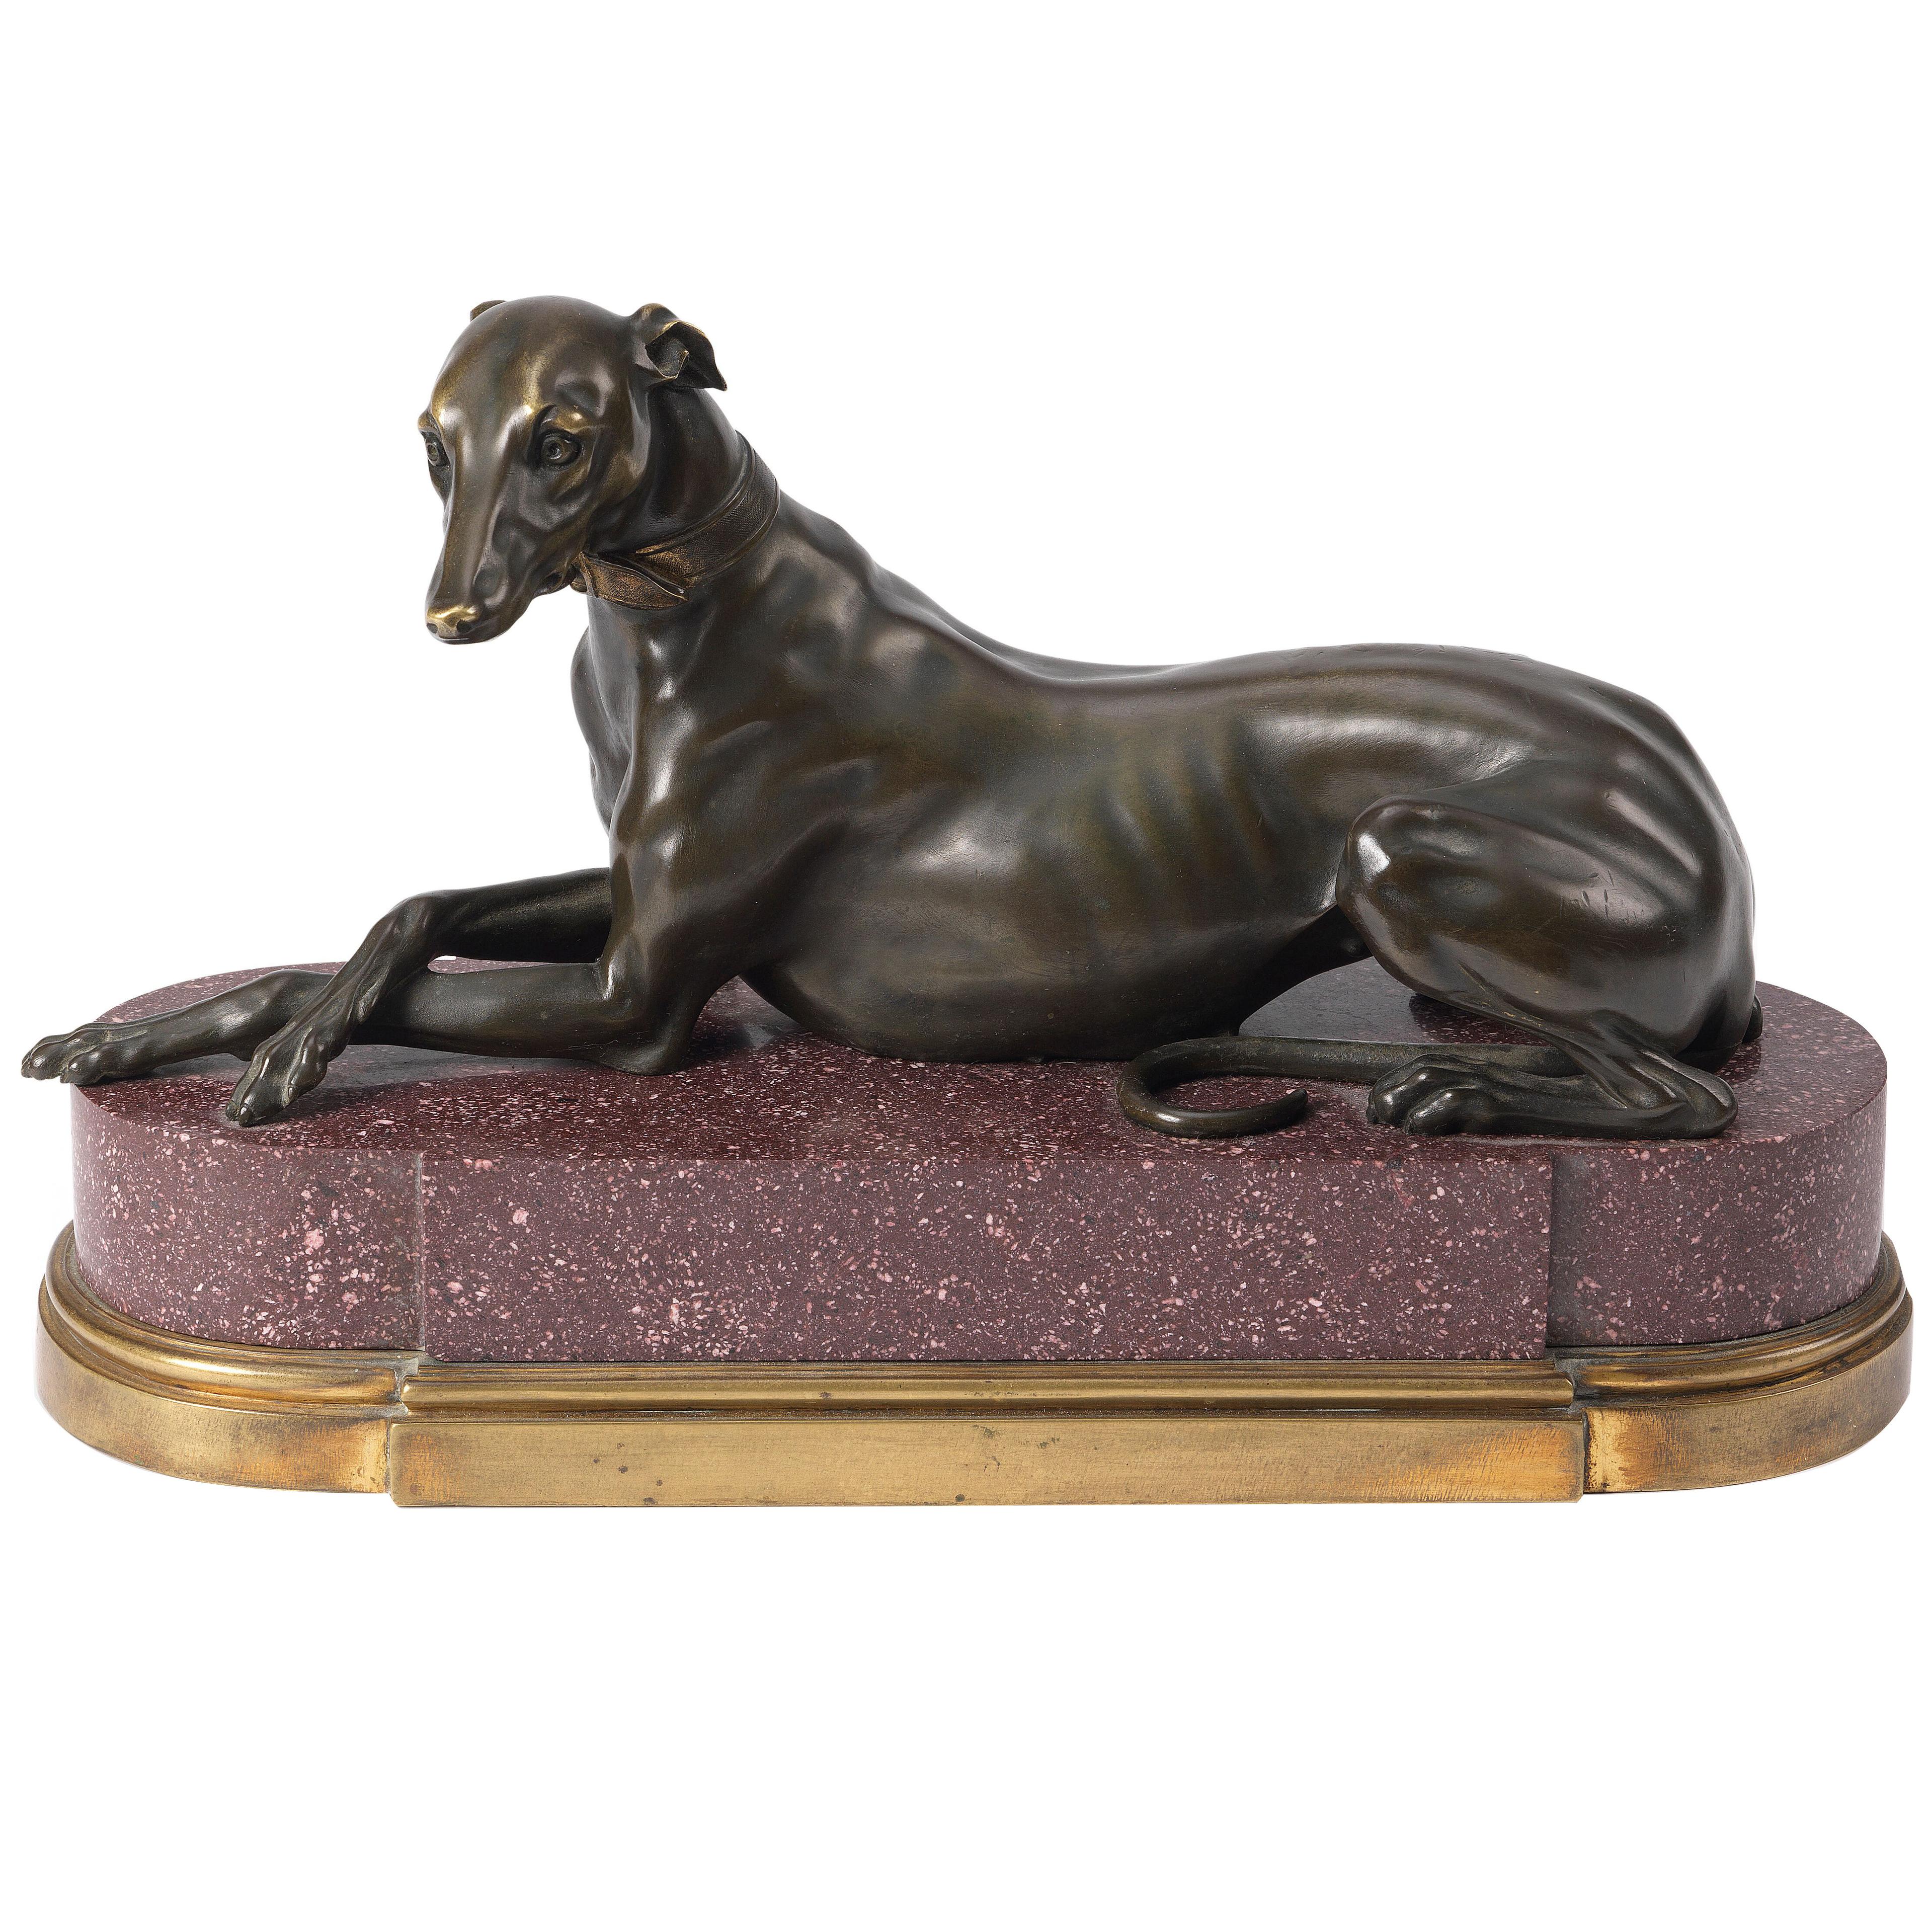 Elegant Early 19th Century French Bronze Figure of a Greyhound on Porphyry Base